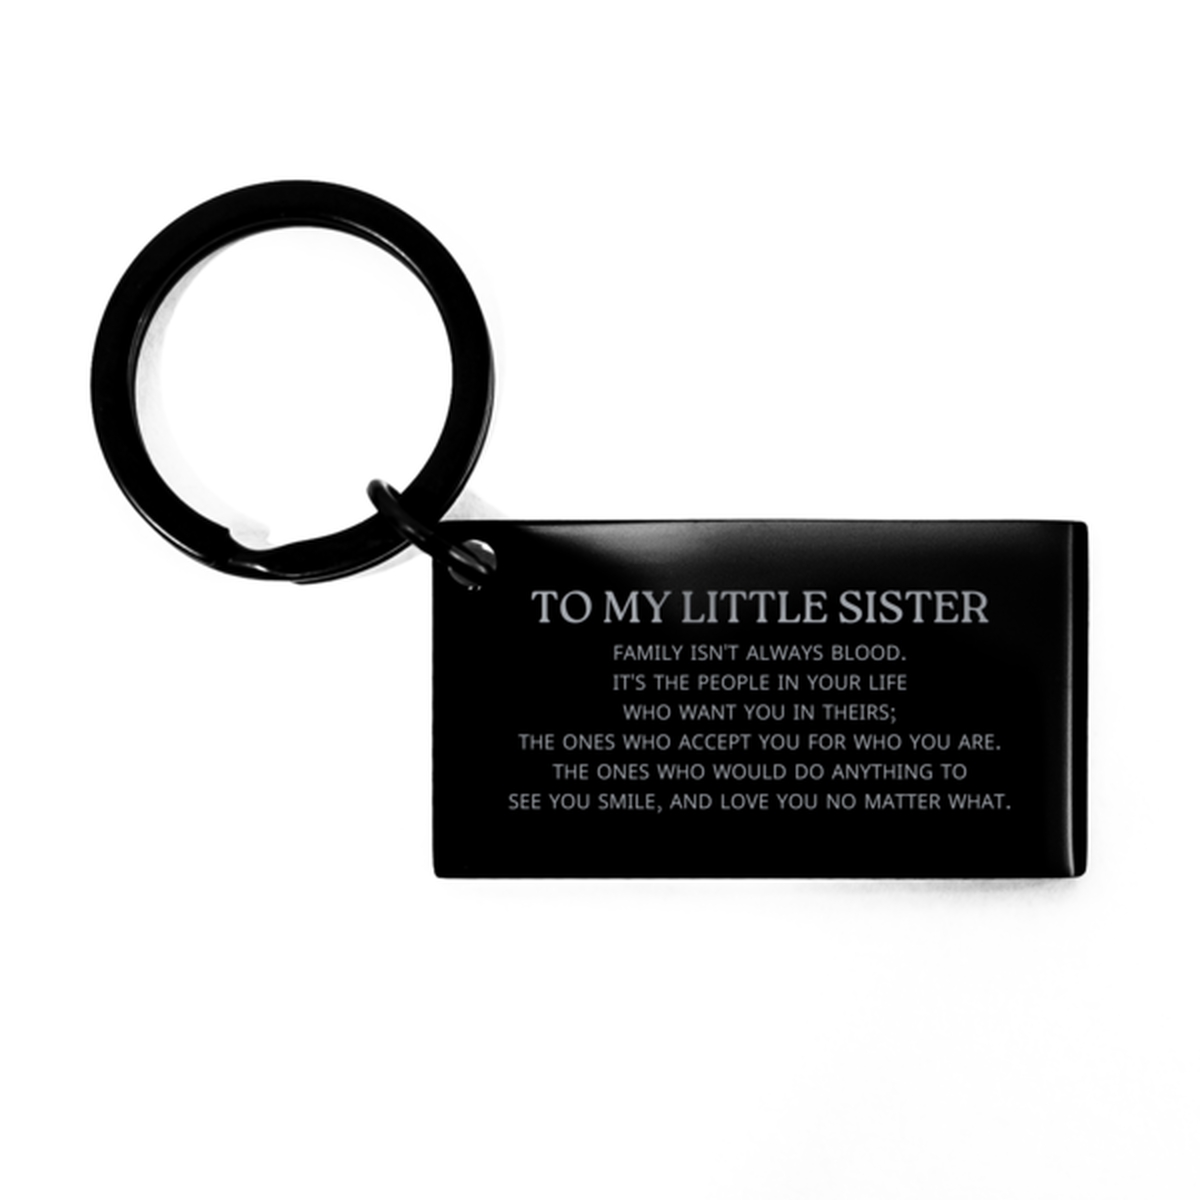 To My Little Sister Gifts, Family isn't always blood, Little Sister Keychain, Birthday Christmas Unique Present For Little Sister